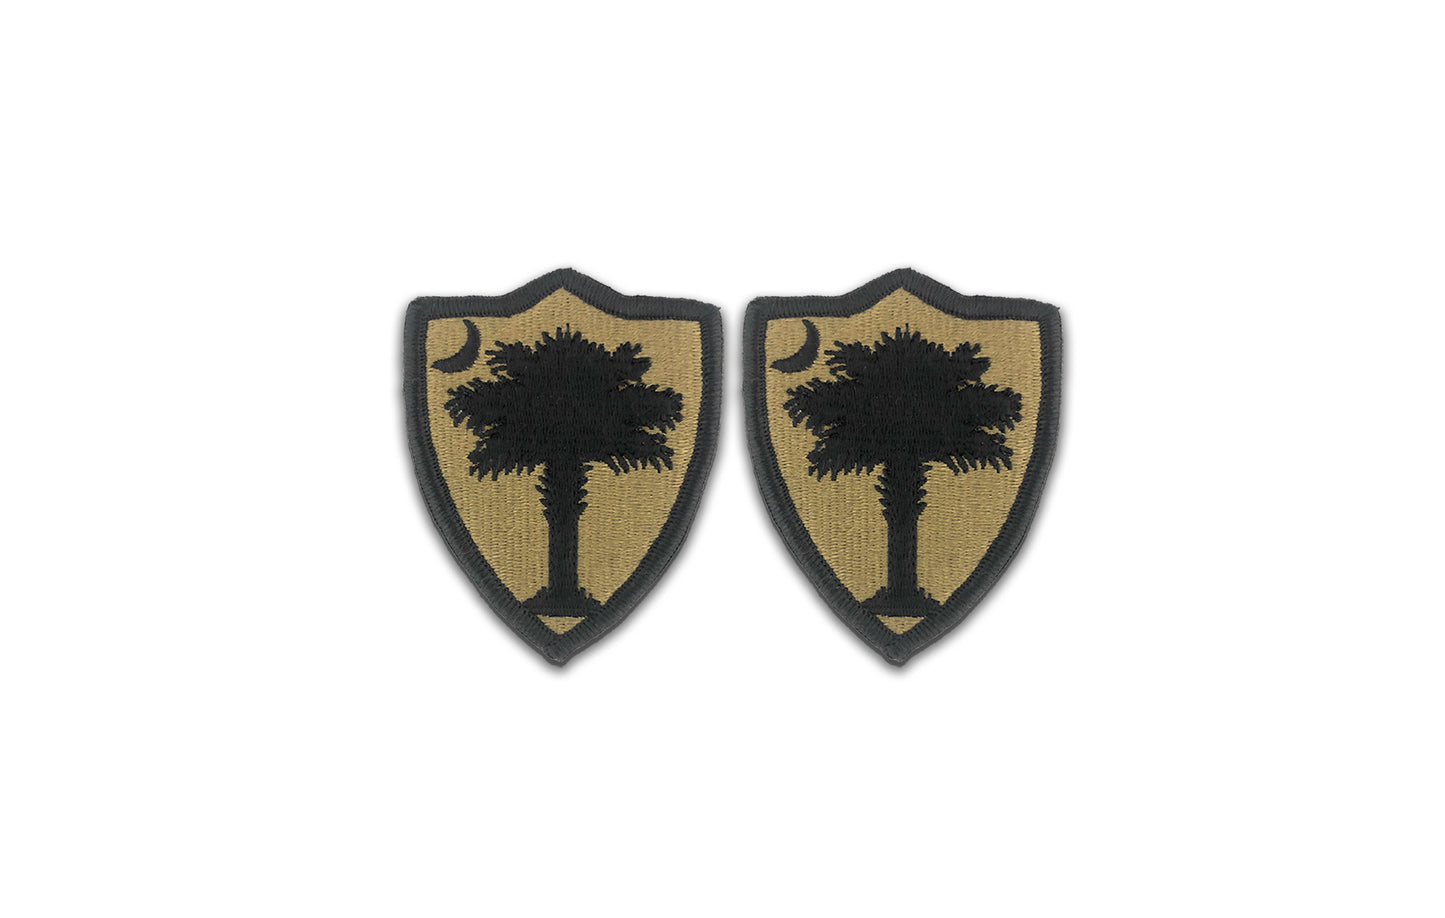 U.S. Army South Carolina National Guard OCP Patch with Hook Fastener (pair)